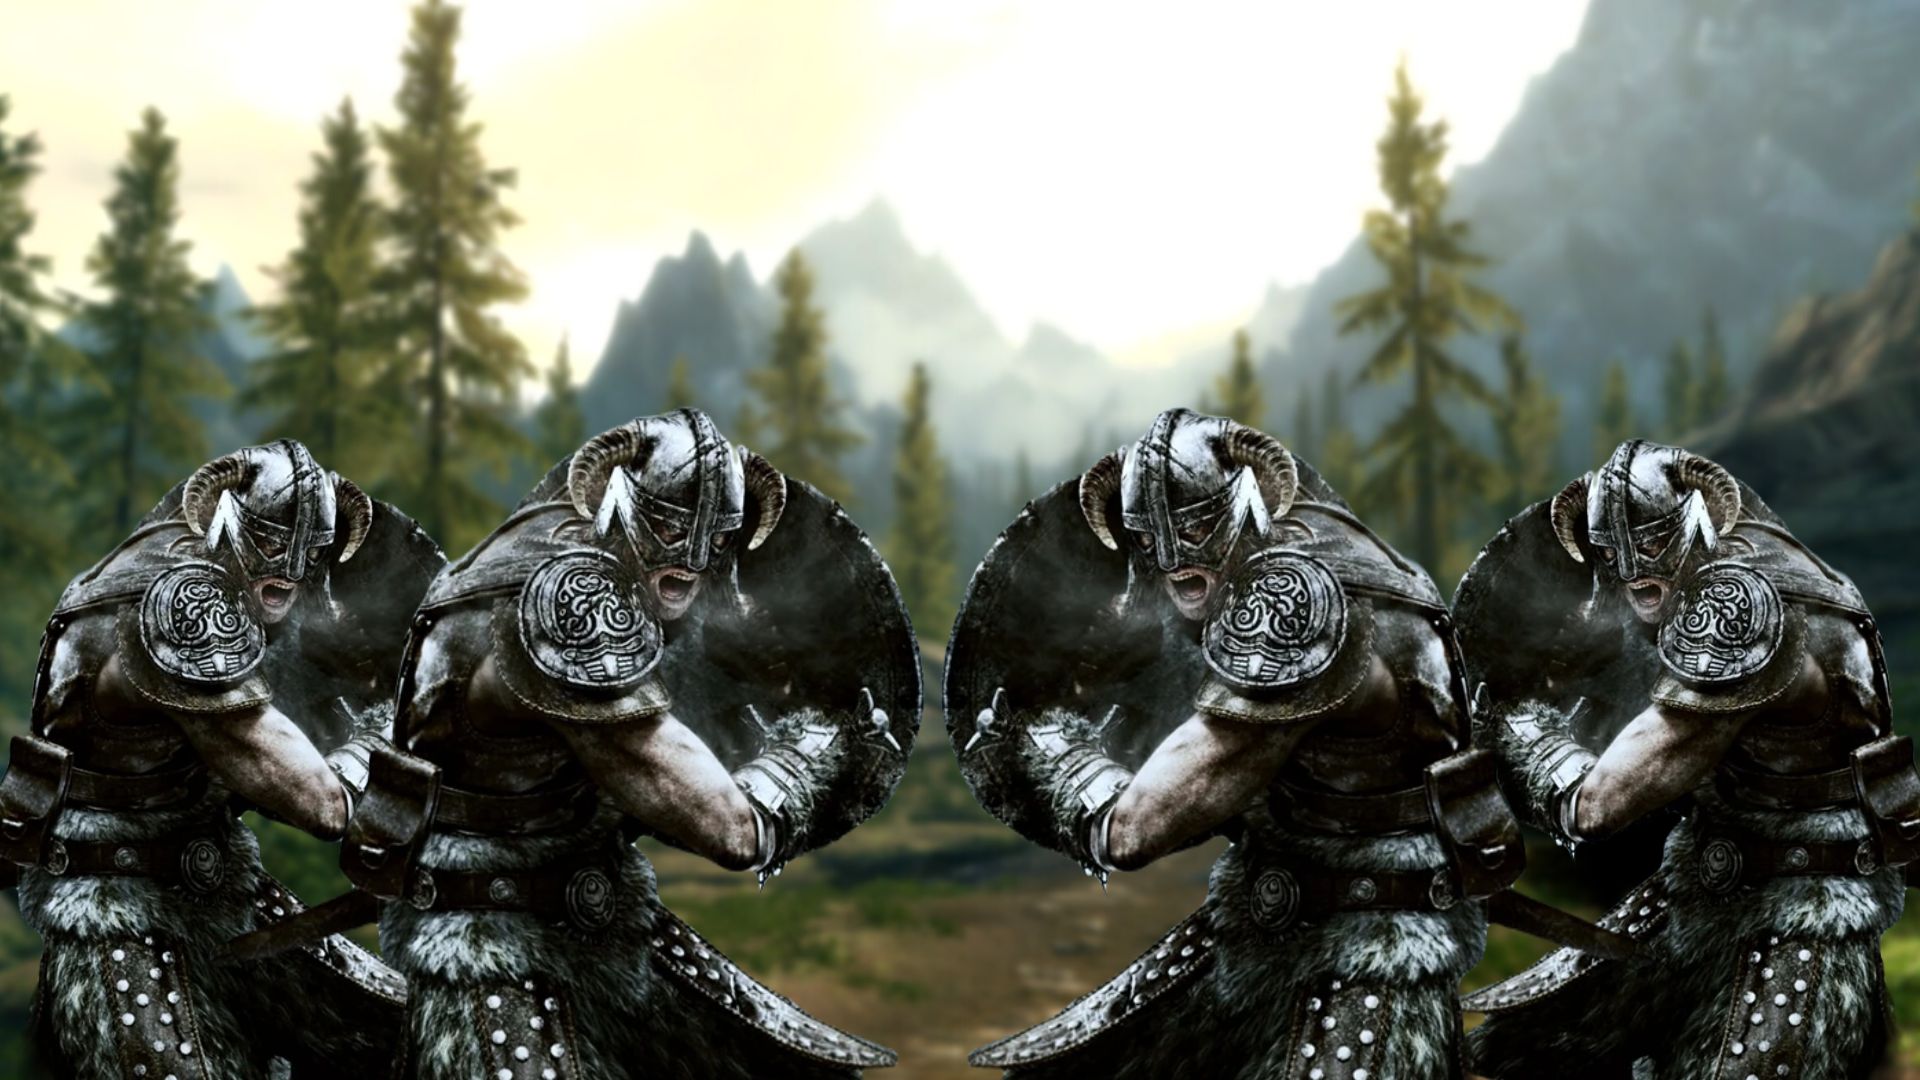 Skyrim mod turns every NPC into the Dragonborn, and it's chaos